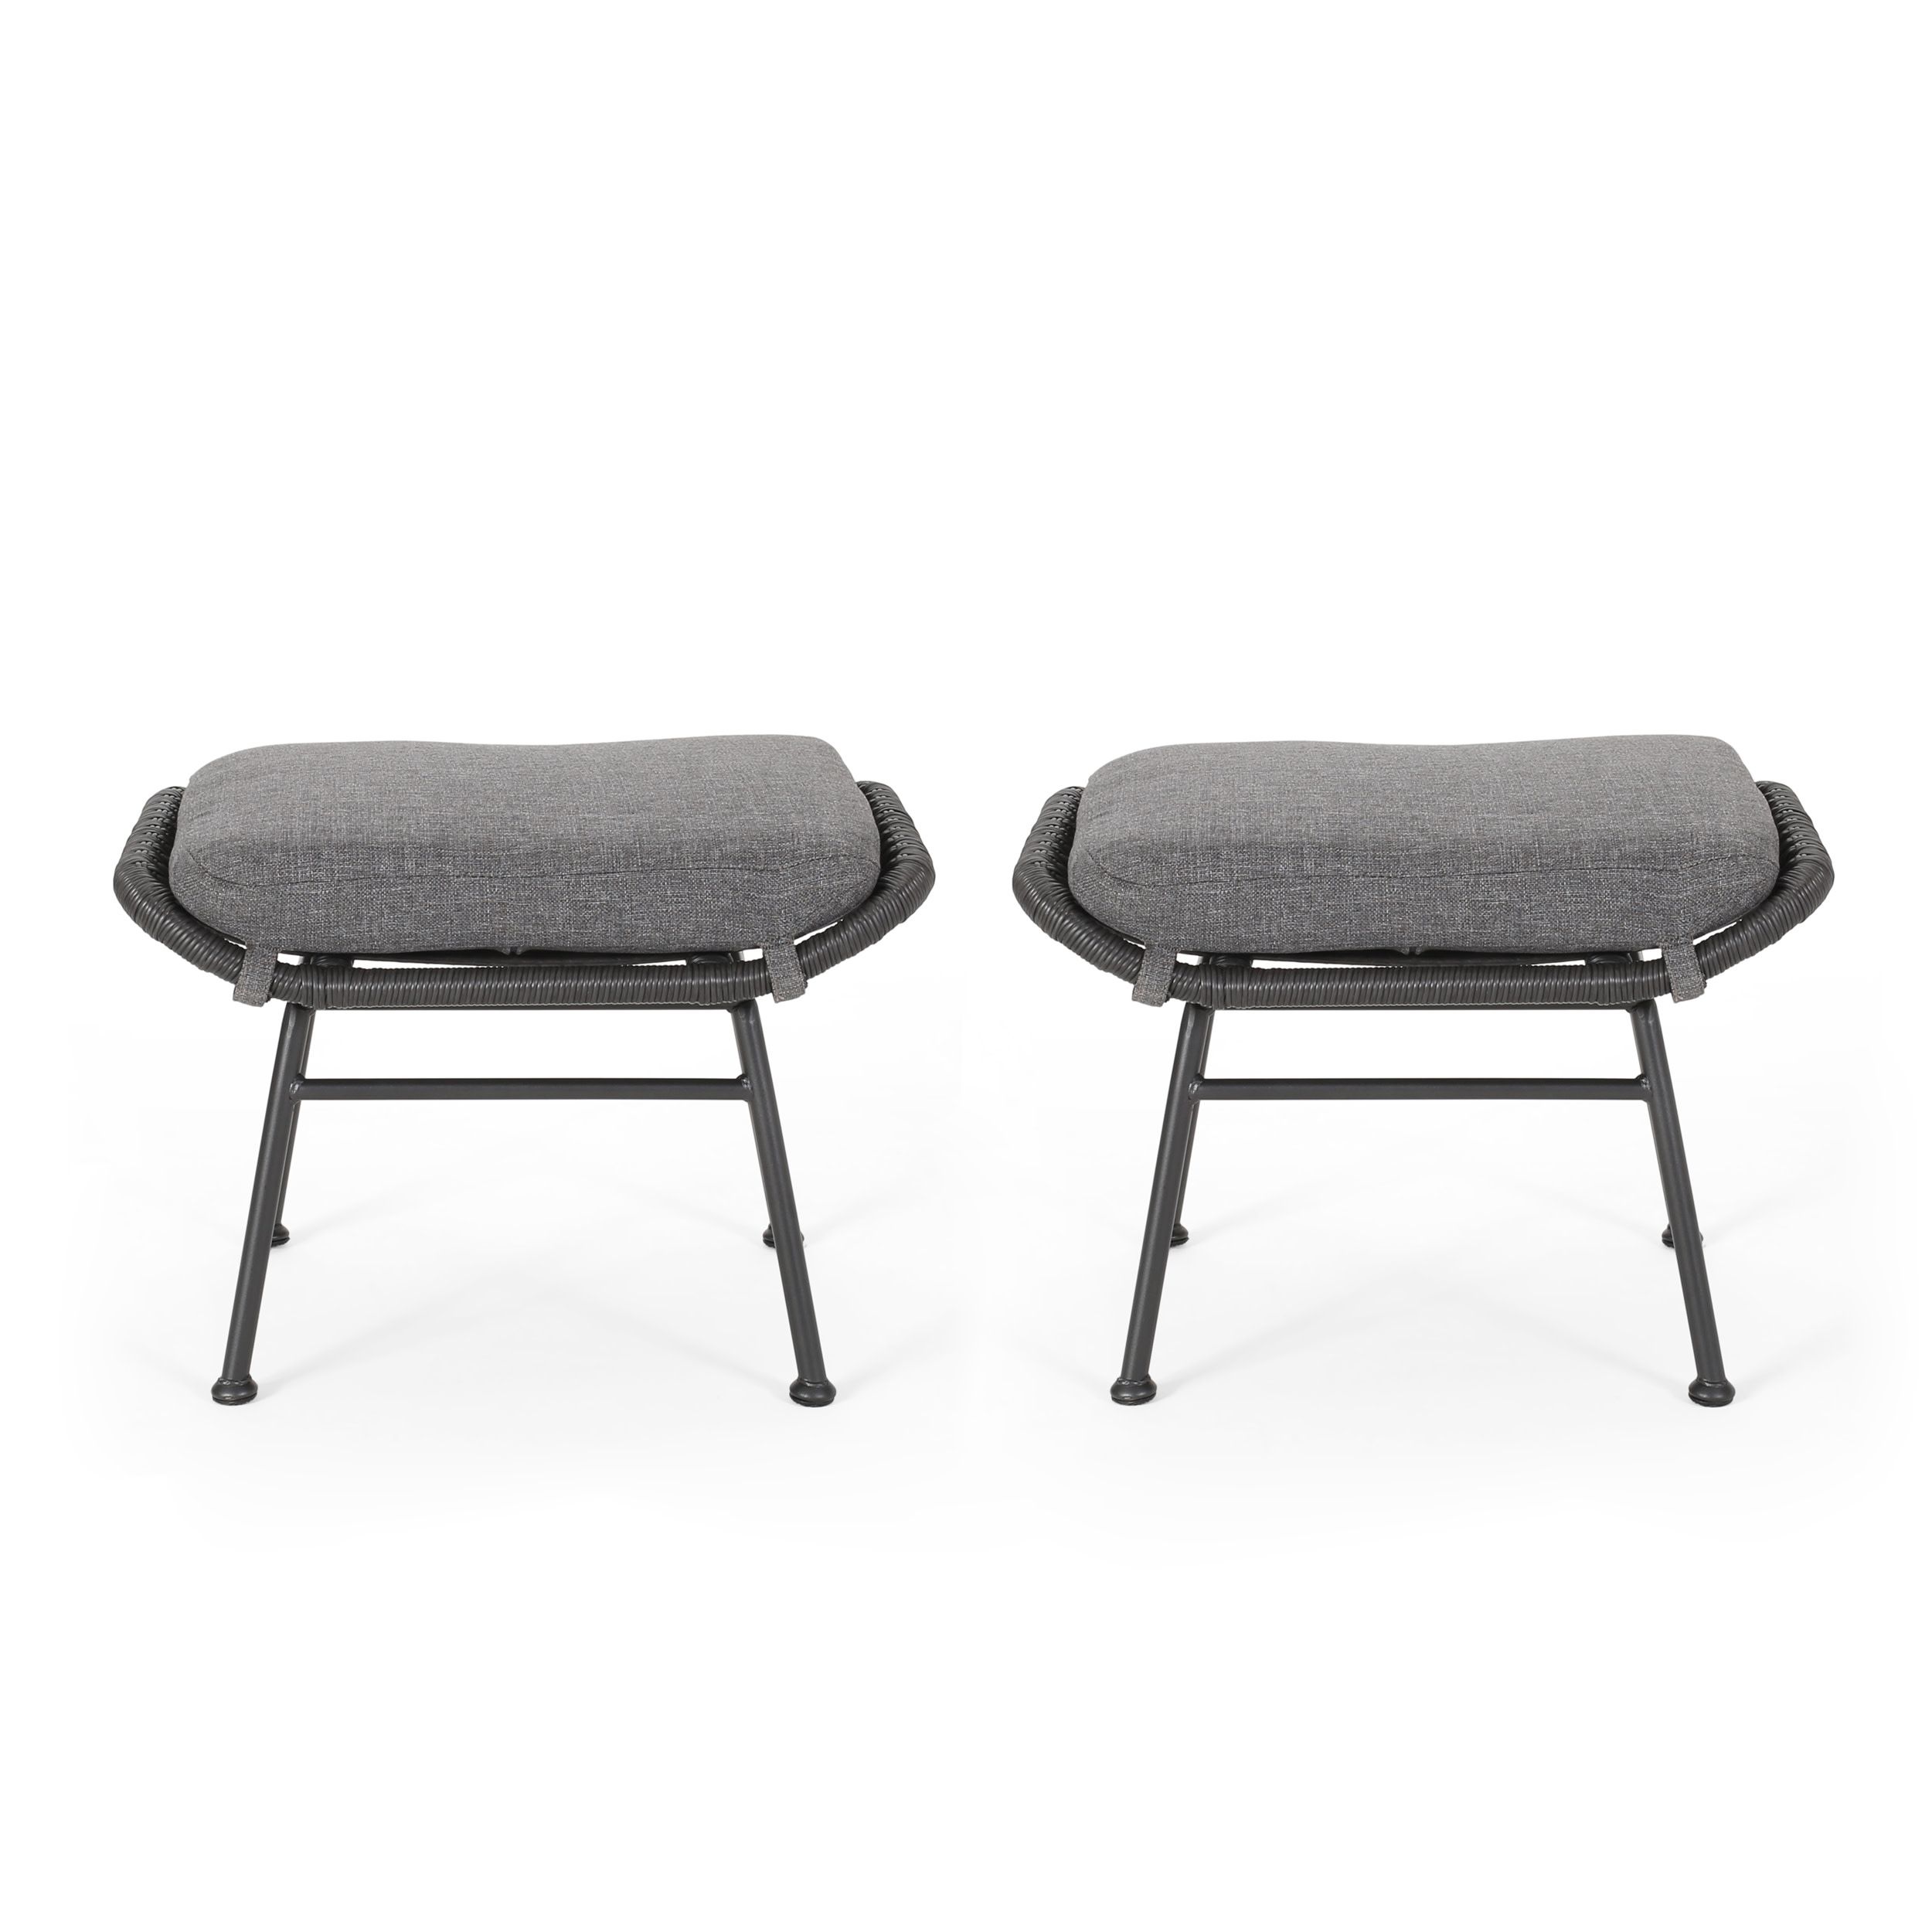 Cavelier Outdoor Wicker Ottomans With Cushion, Set Of 2, Gray, Dark Gray,  And Black – Walmart For Ottomans With Cushion (View 12 of 15)